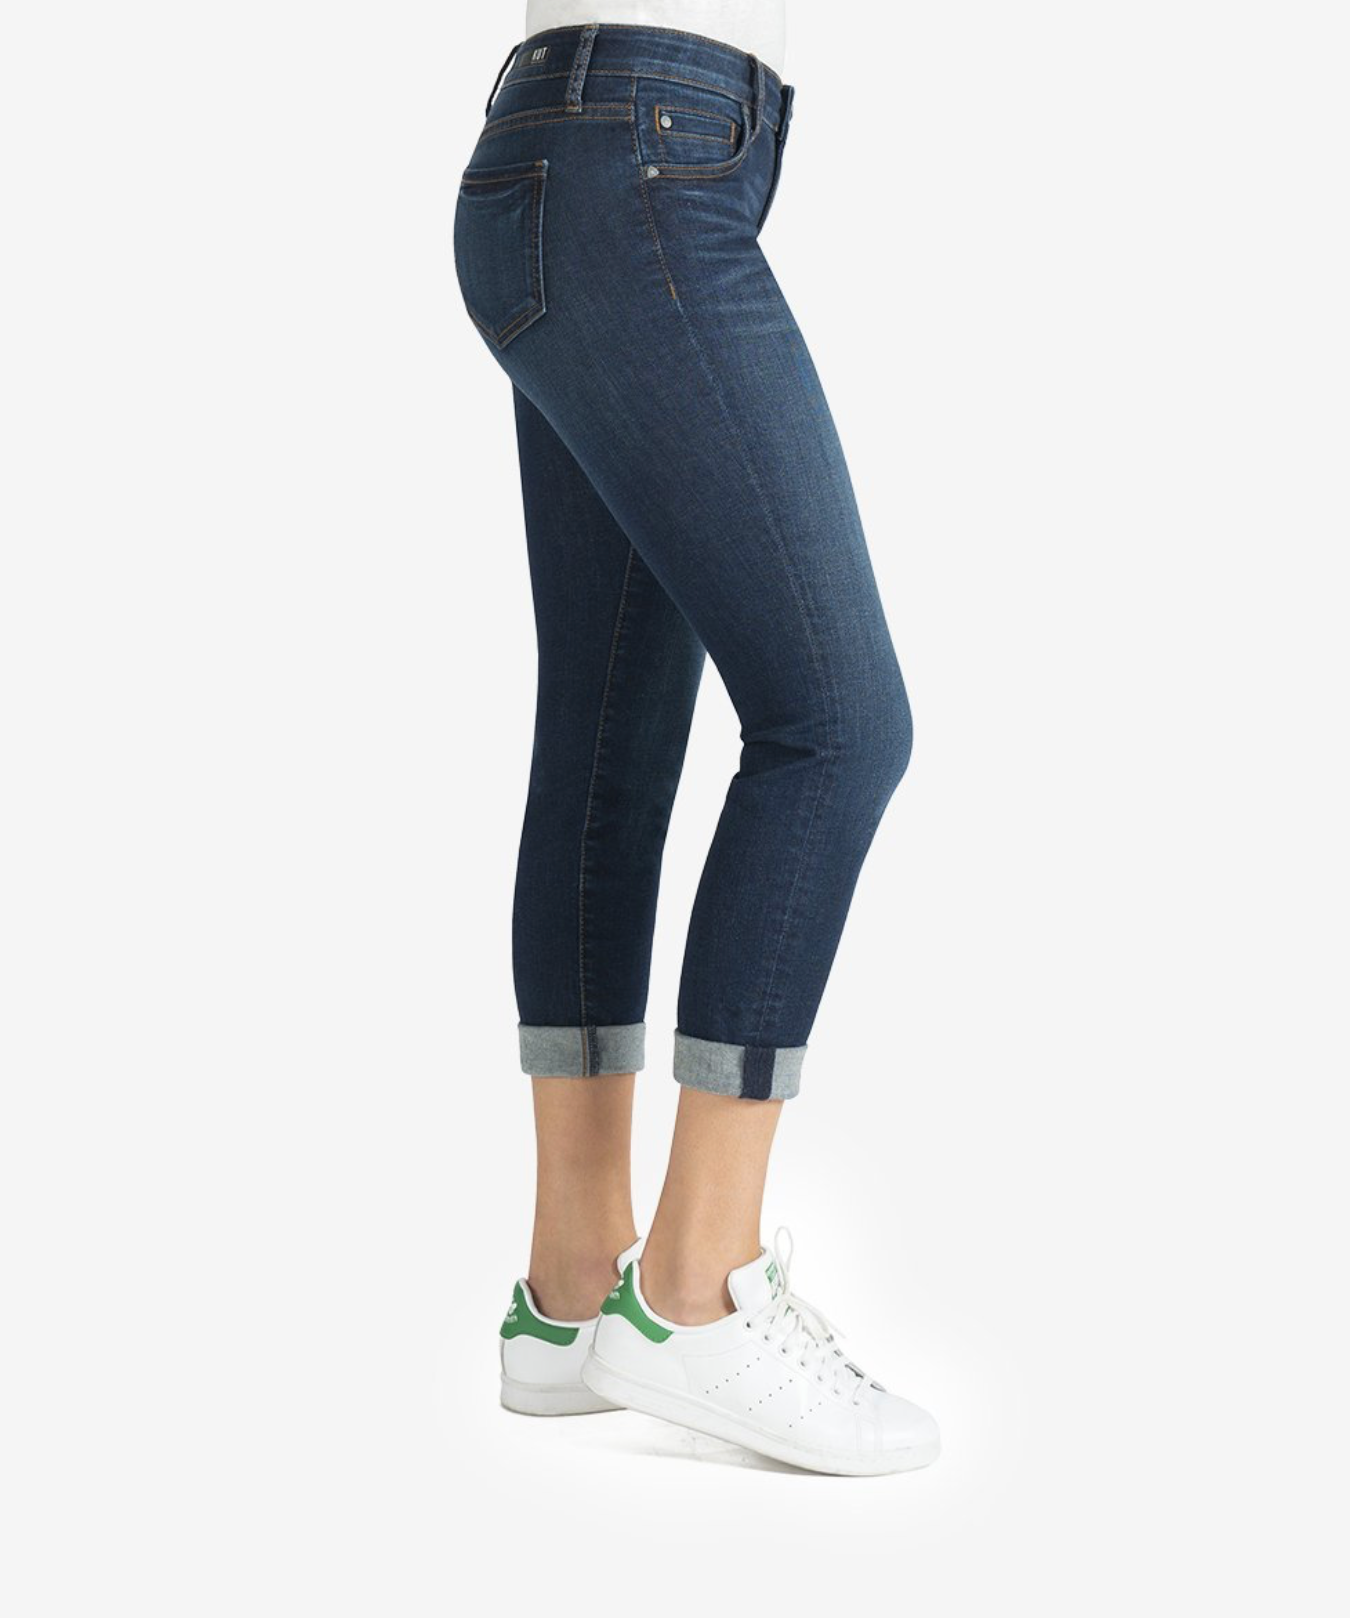 Kut From The Kloth Catherine Mid Rise Boyfriend Jeans (Abelia Wash)